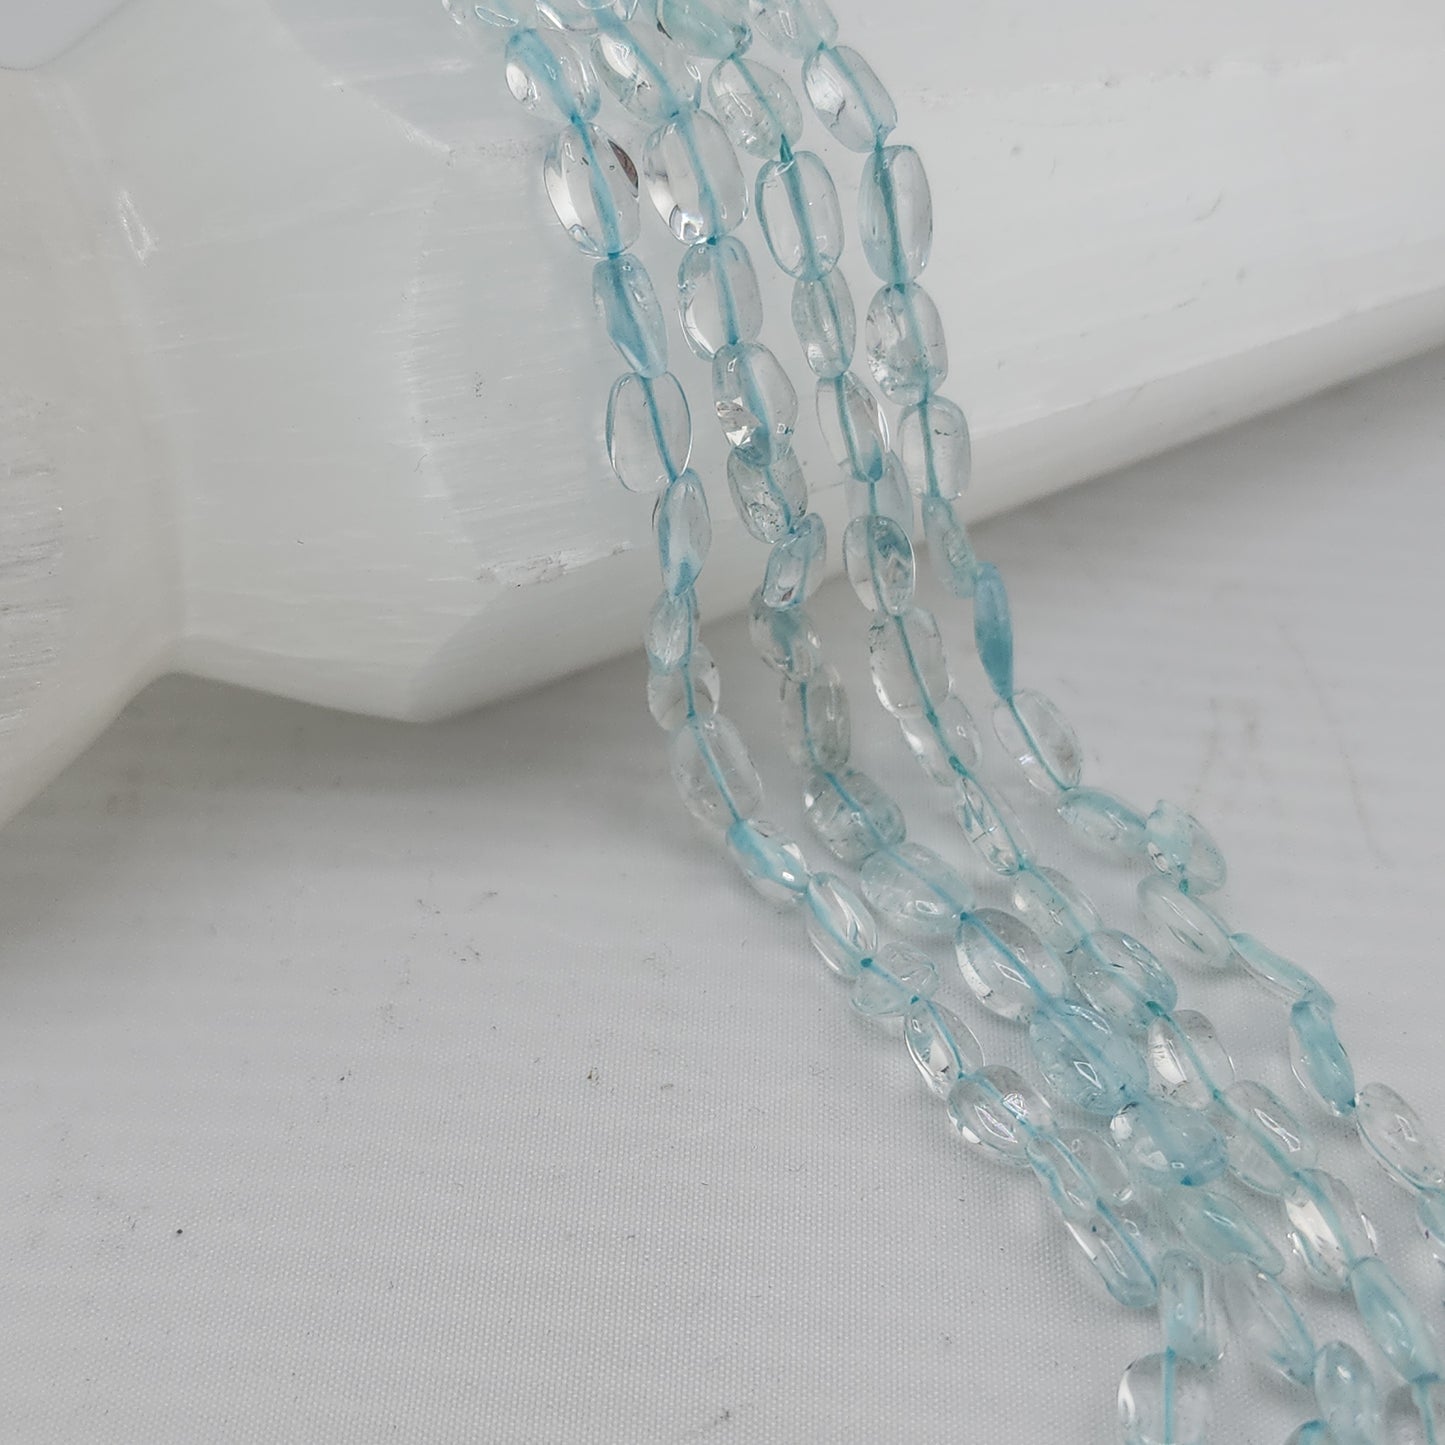 Crafting supplies such as aquamarine beads available at wholesale and retail prices, only at our crystal shop in San Diego!